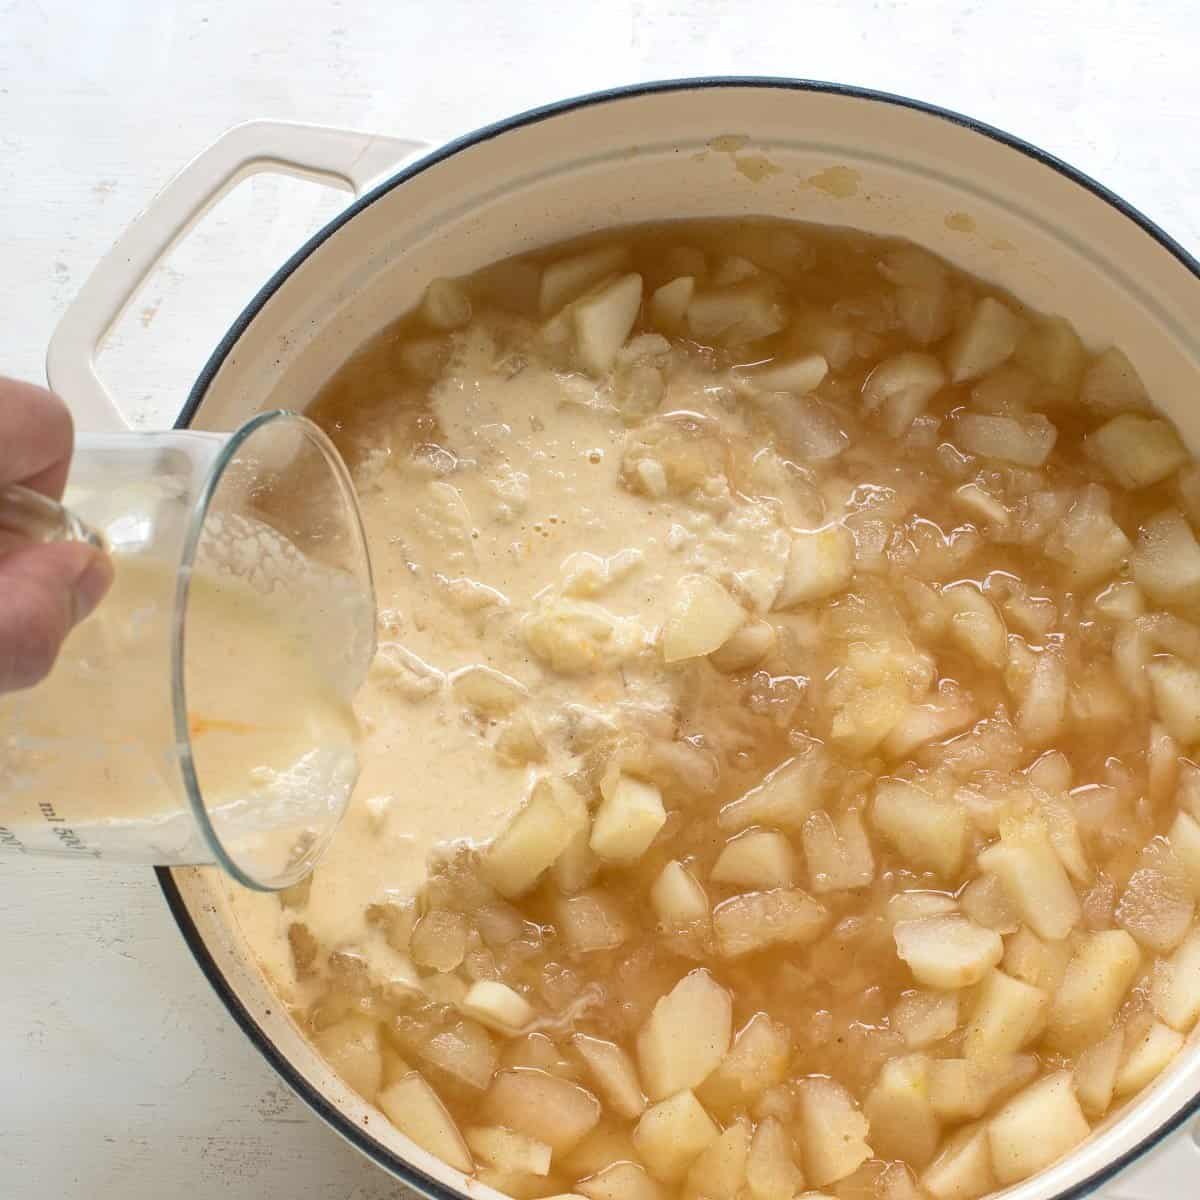 Making apple jelly, thickening pieces of cooked apples with cornstarch mixture.